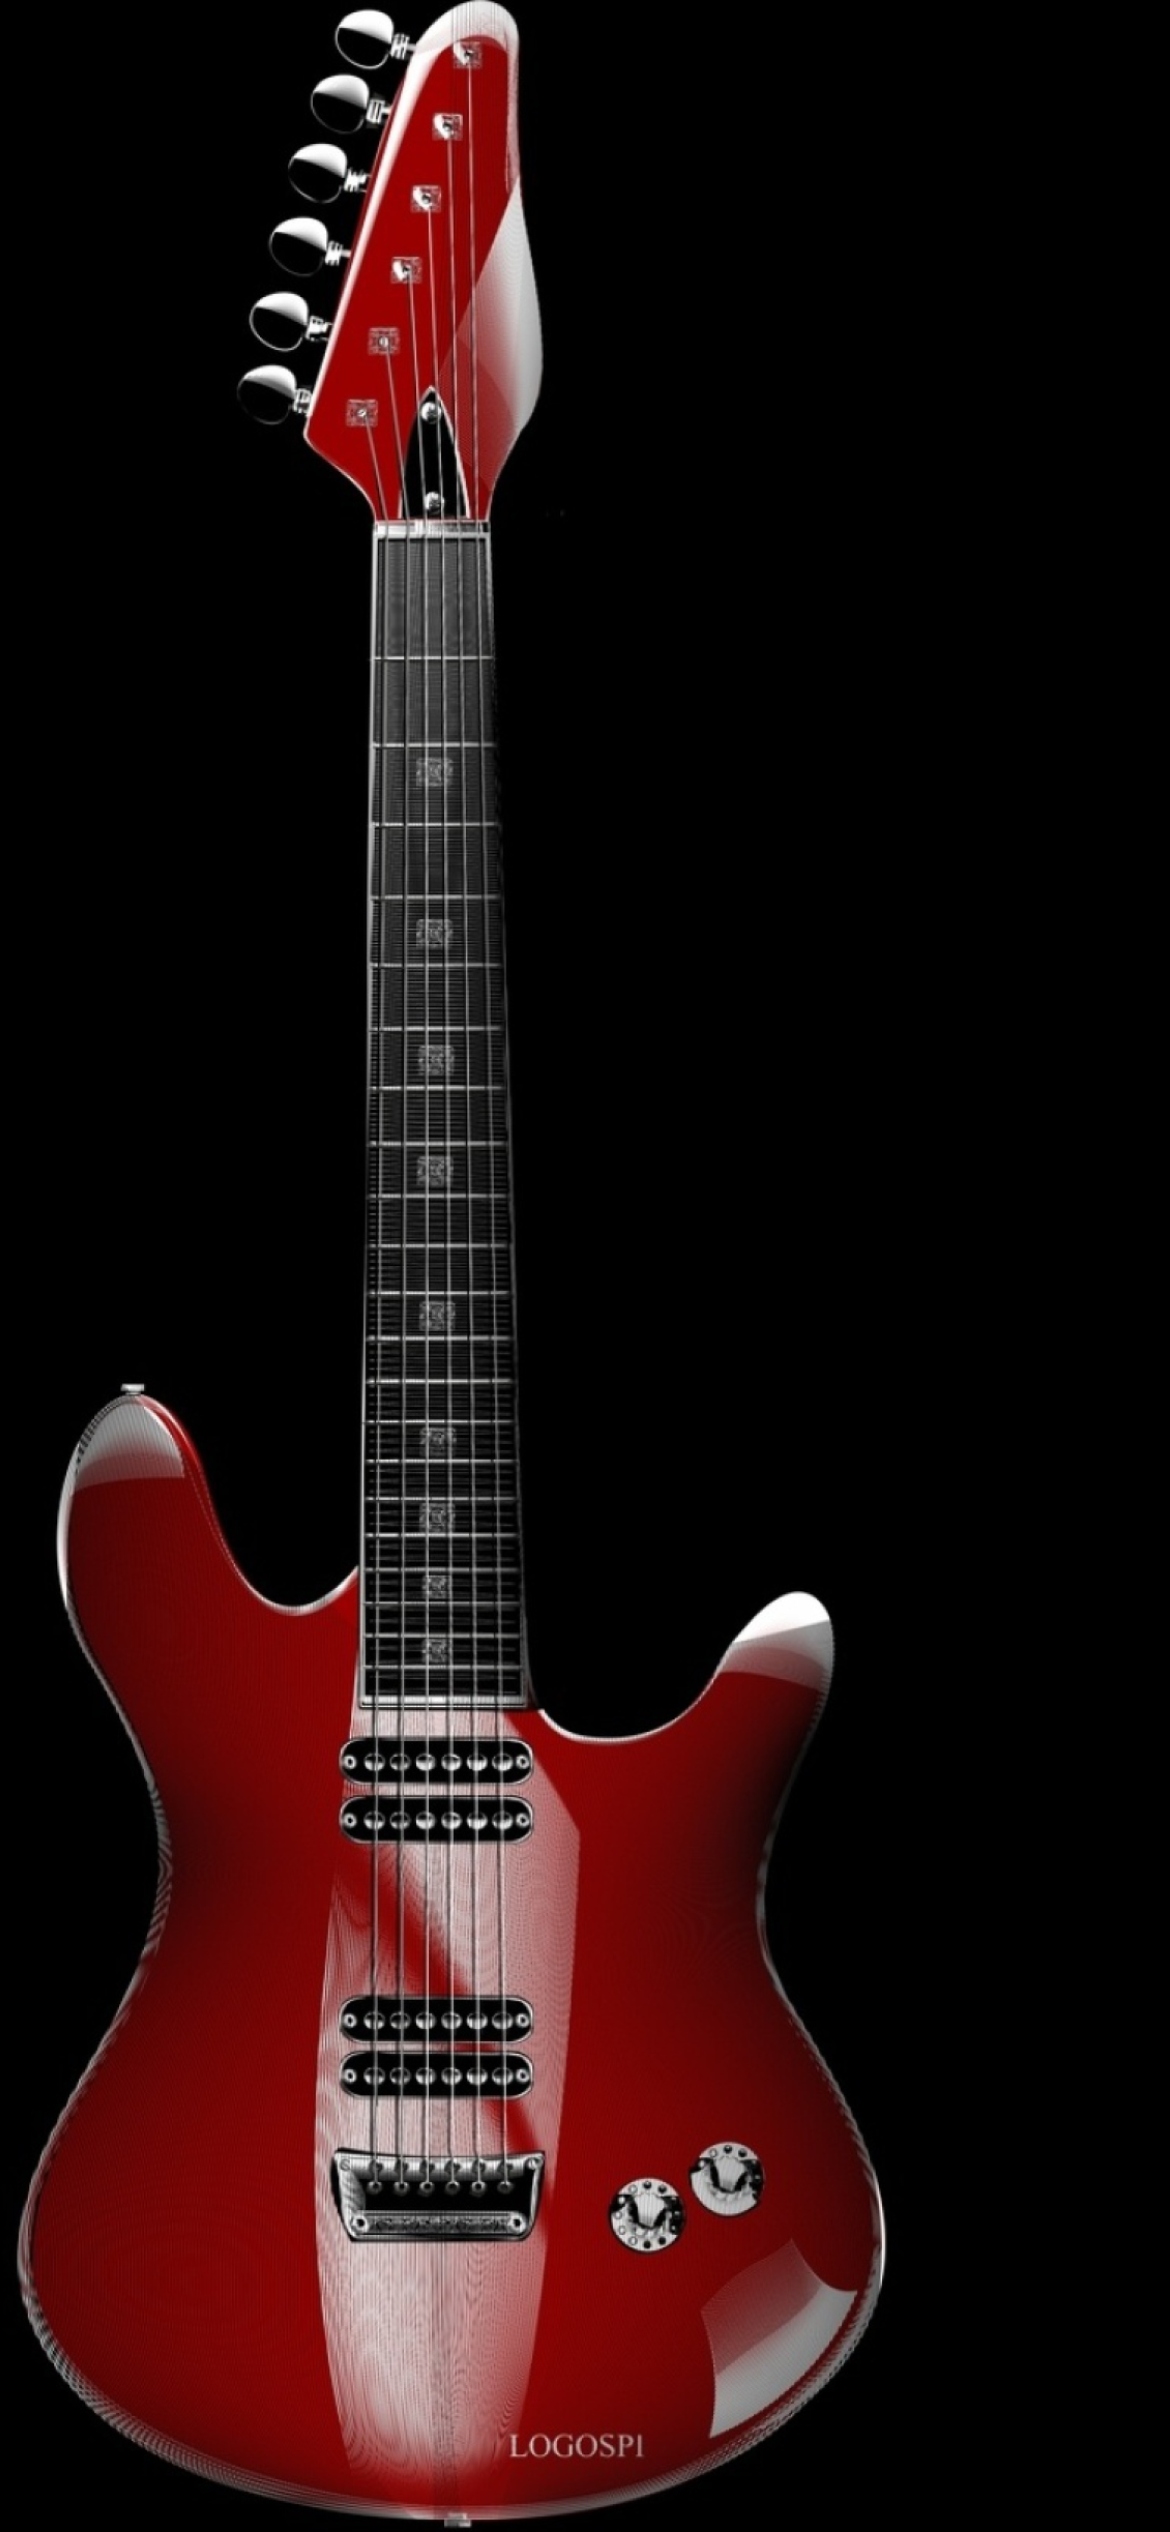 Red Guitar Wallpaper for iPhone XR